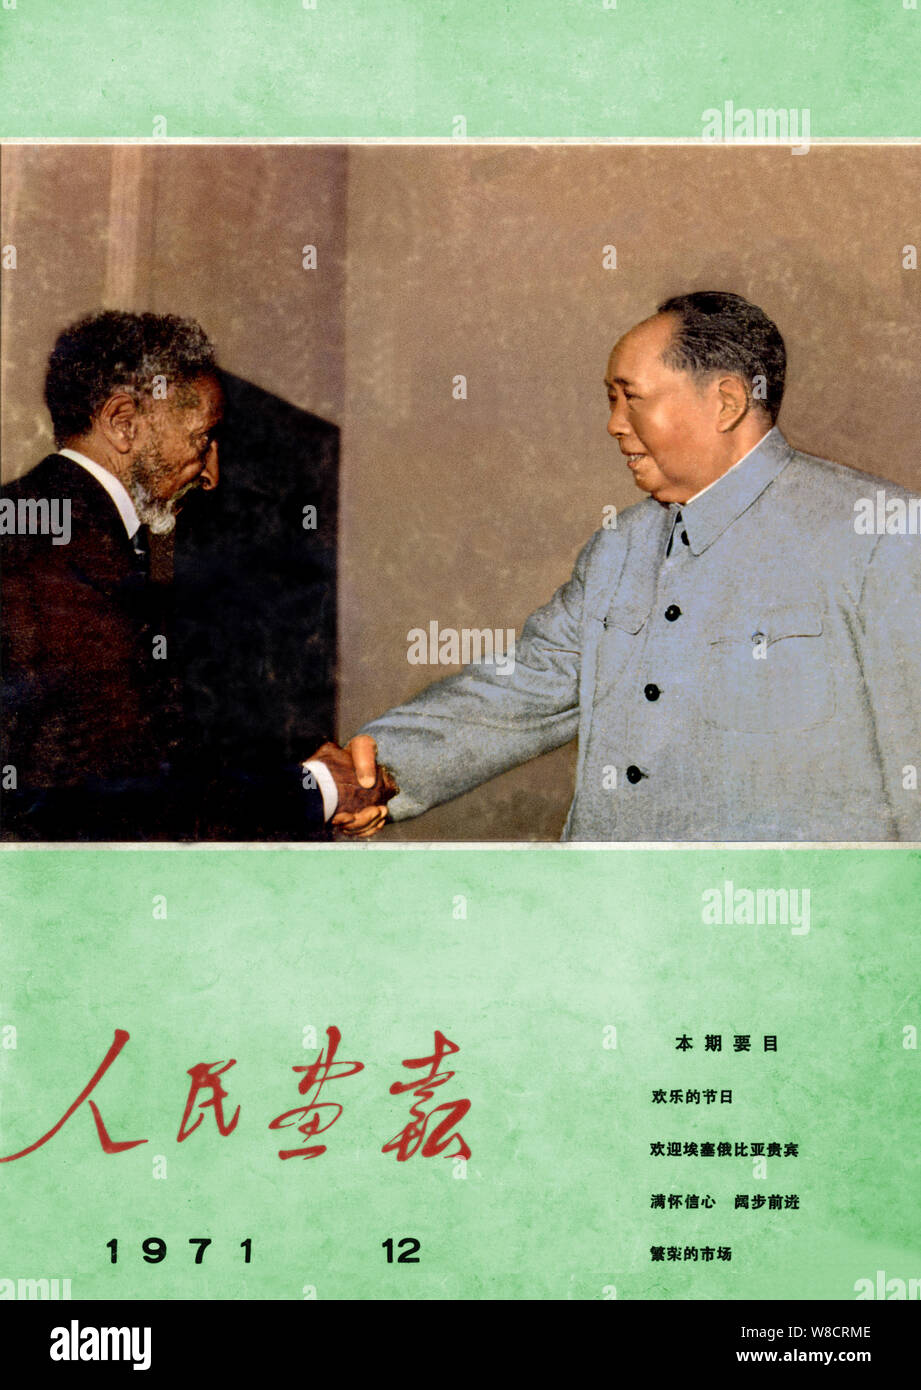 This cover of the China Pictorial issued in December 1971 features Chairman Mao Zedong, right, meeting Emperor of Ethiopia Haile Selassie I. Stock Photo